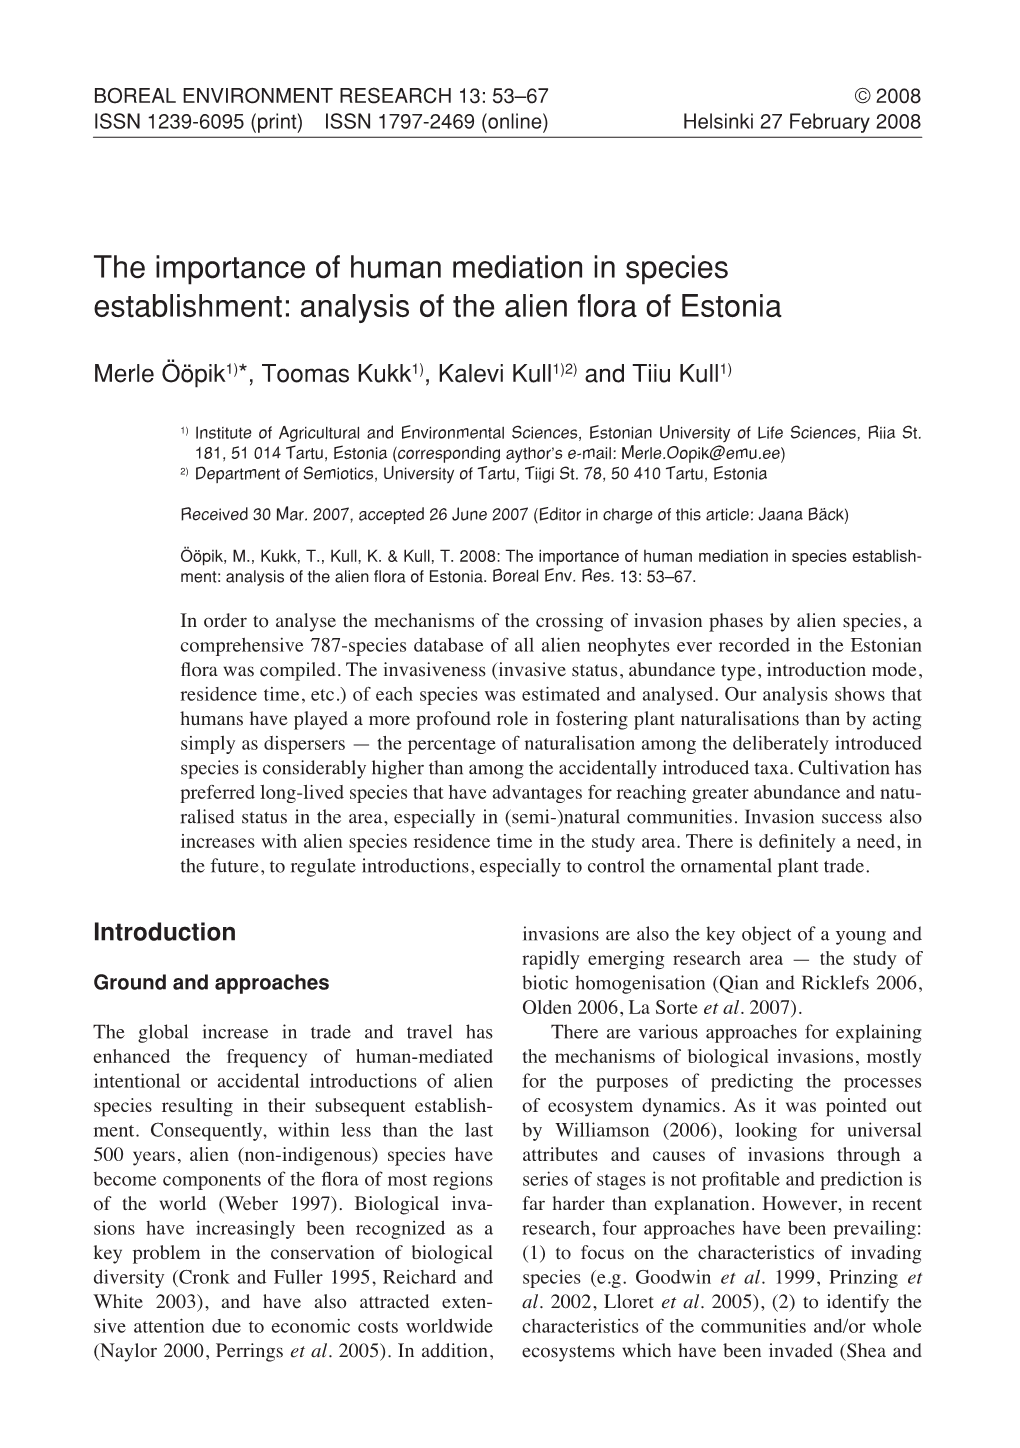 The Importance of Human Mediation in Species Establishment: Analysis of the Alien Flora of Estonia